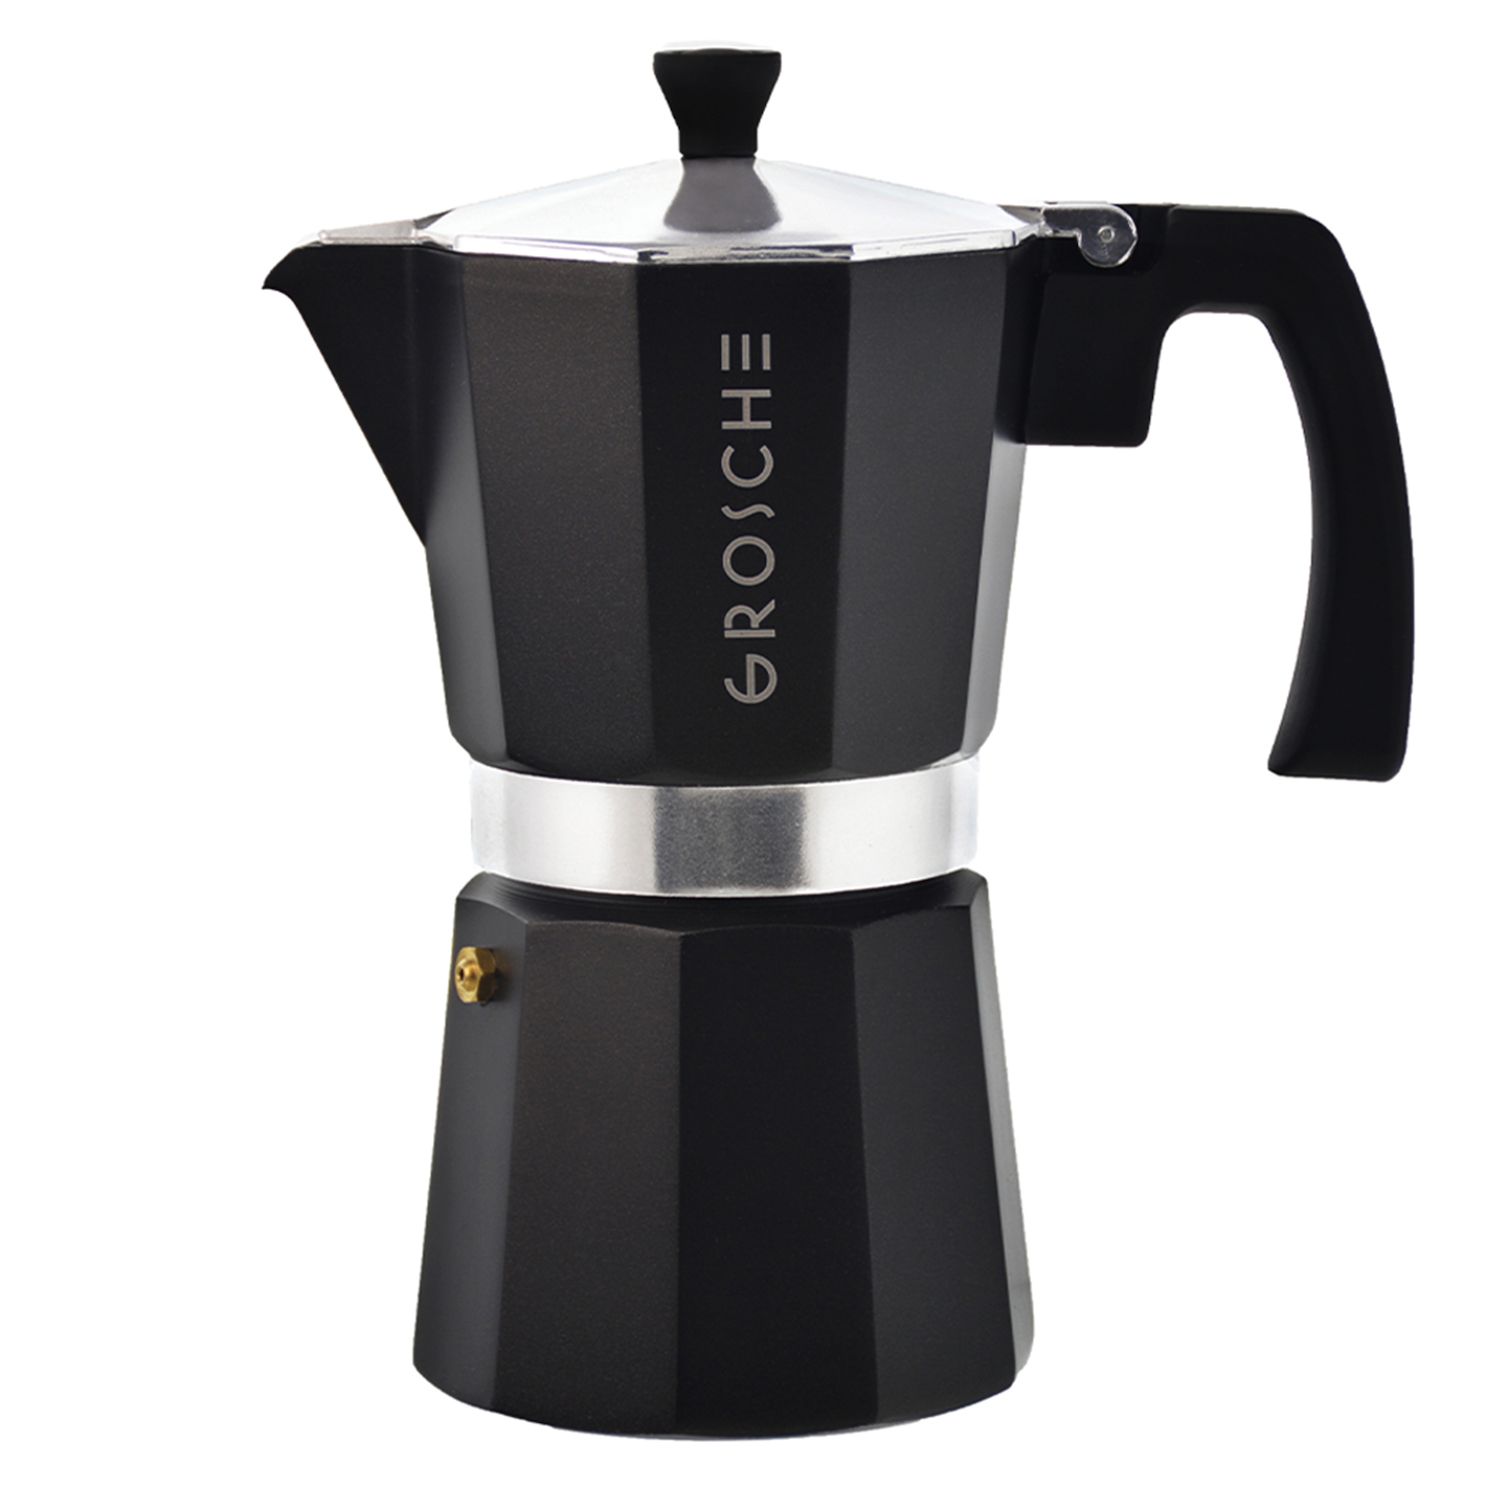 Grosche Milano Stovetop Espresso Coffee Maker and Electric Burr Coffee Grinder Bundle, Blue